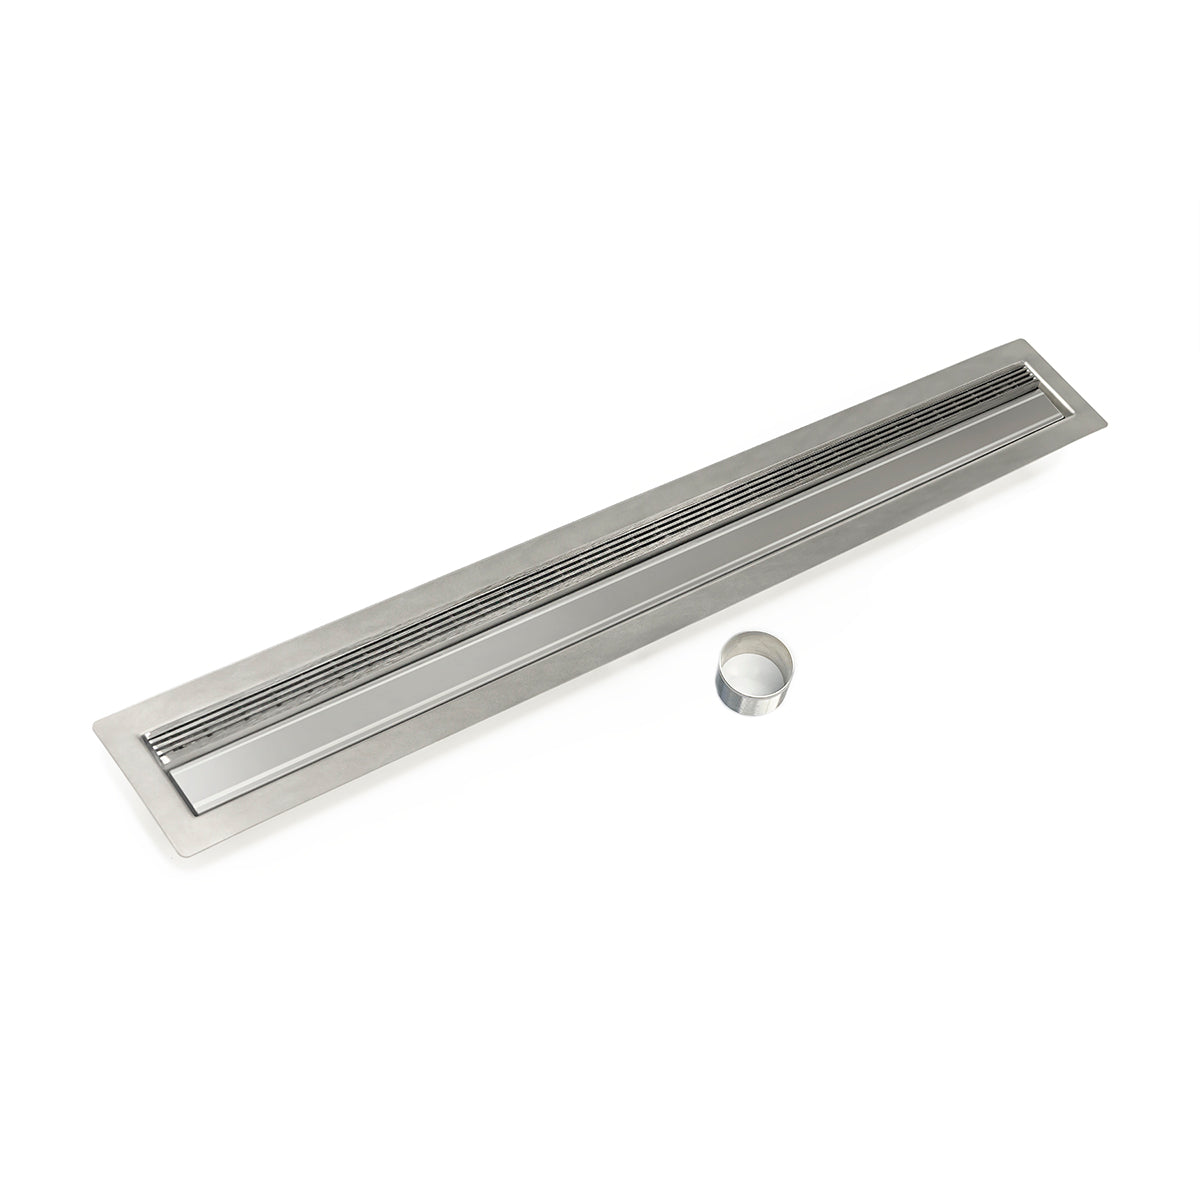 Infinity Drain 42" FCB Series Double Waterproofing Linear Drain Kit with 1" Wedge Wire Grate